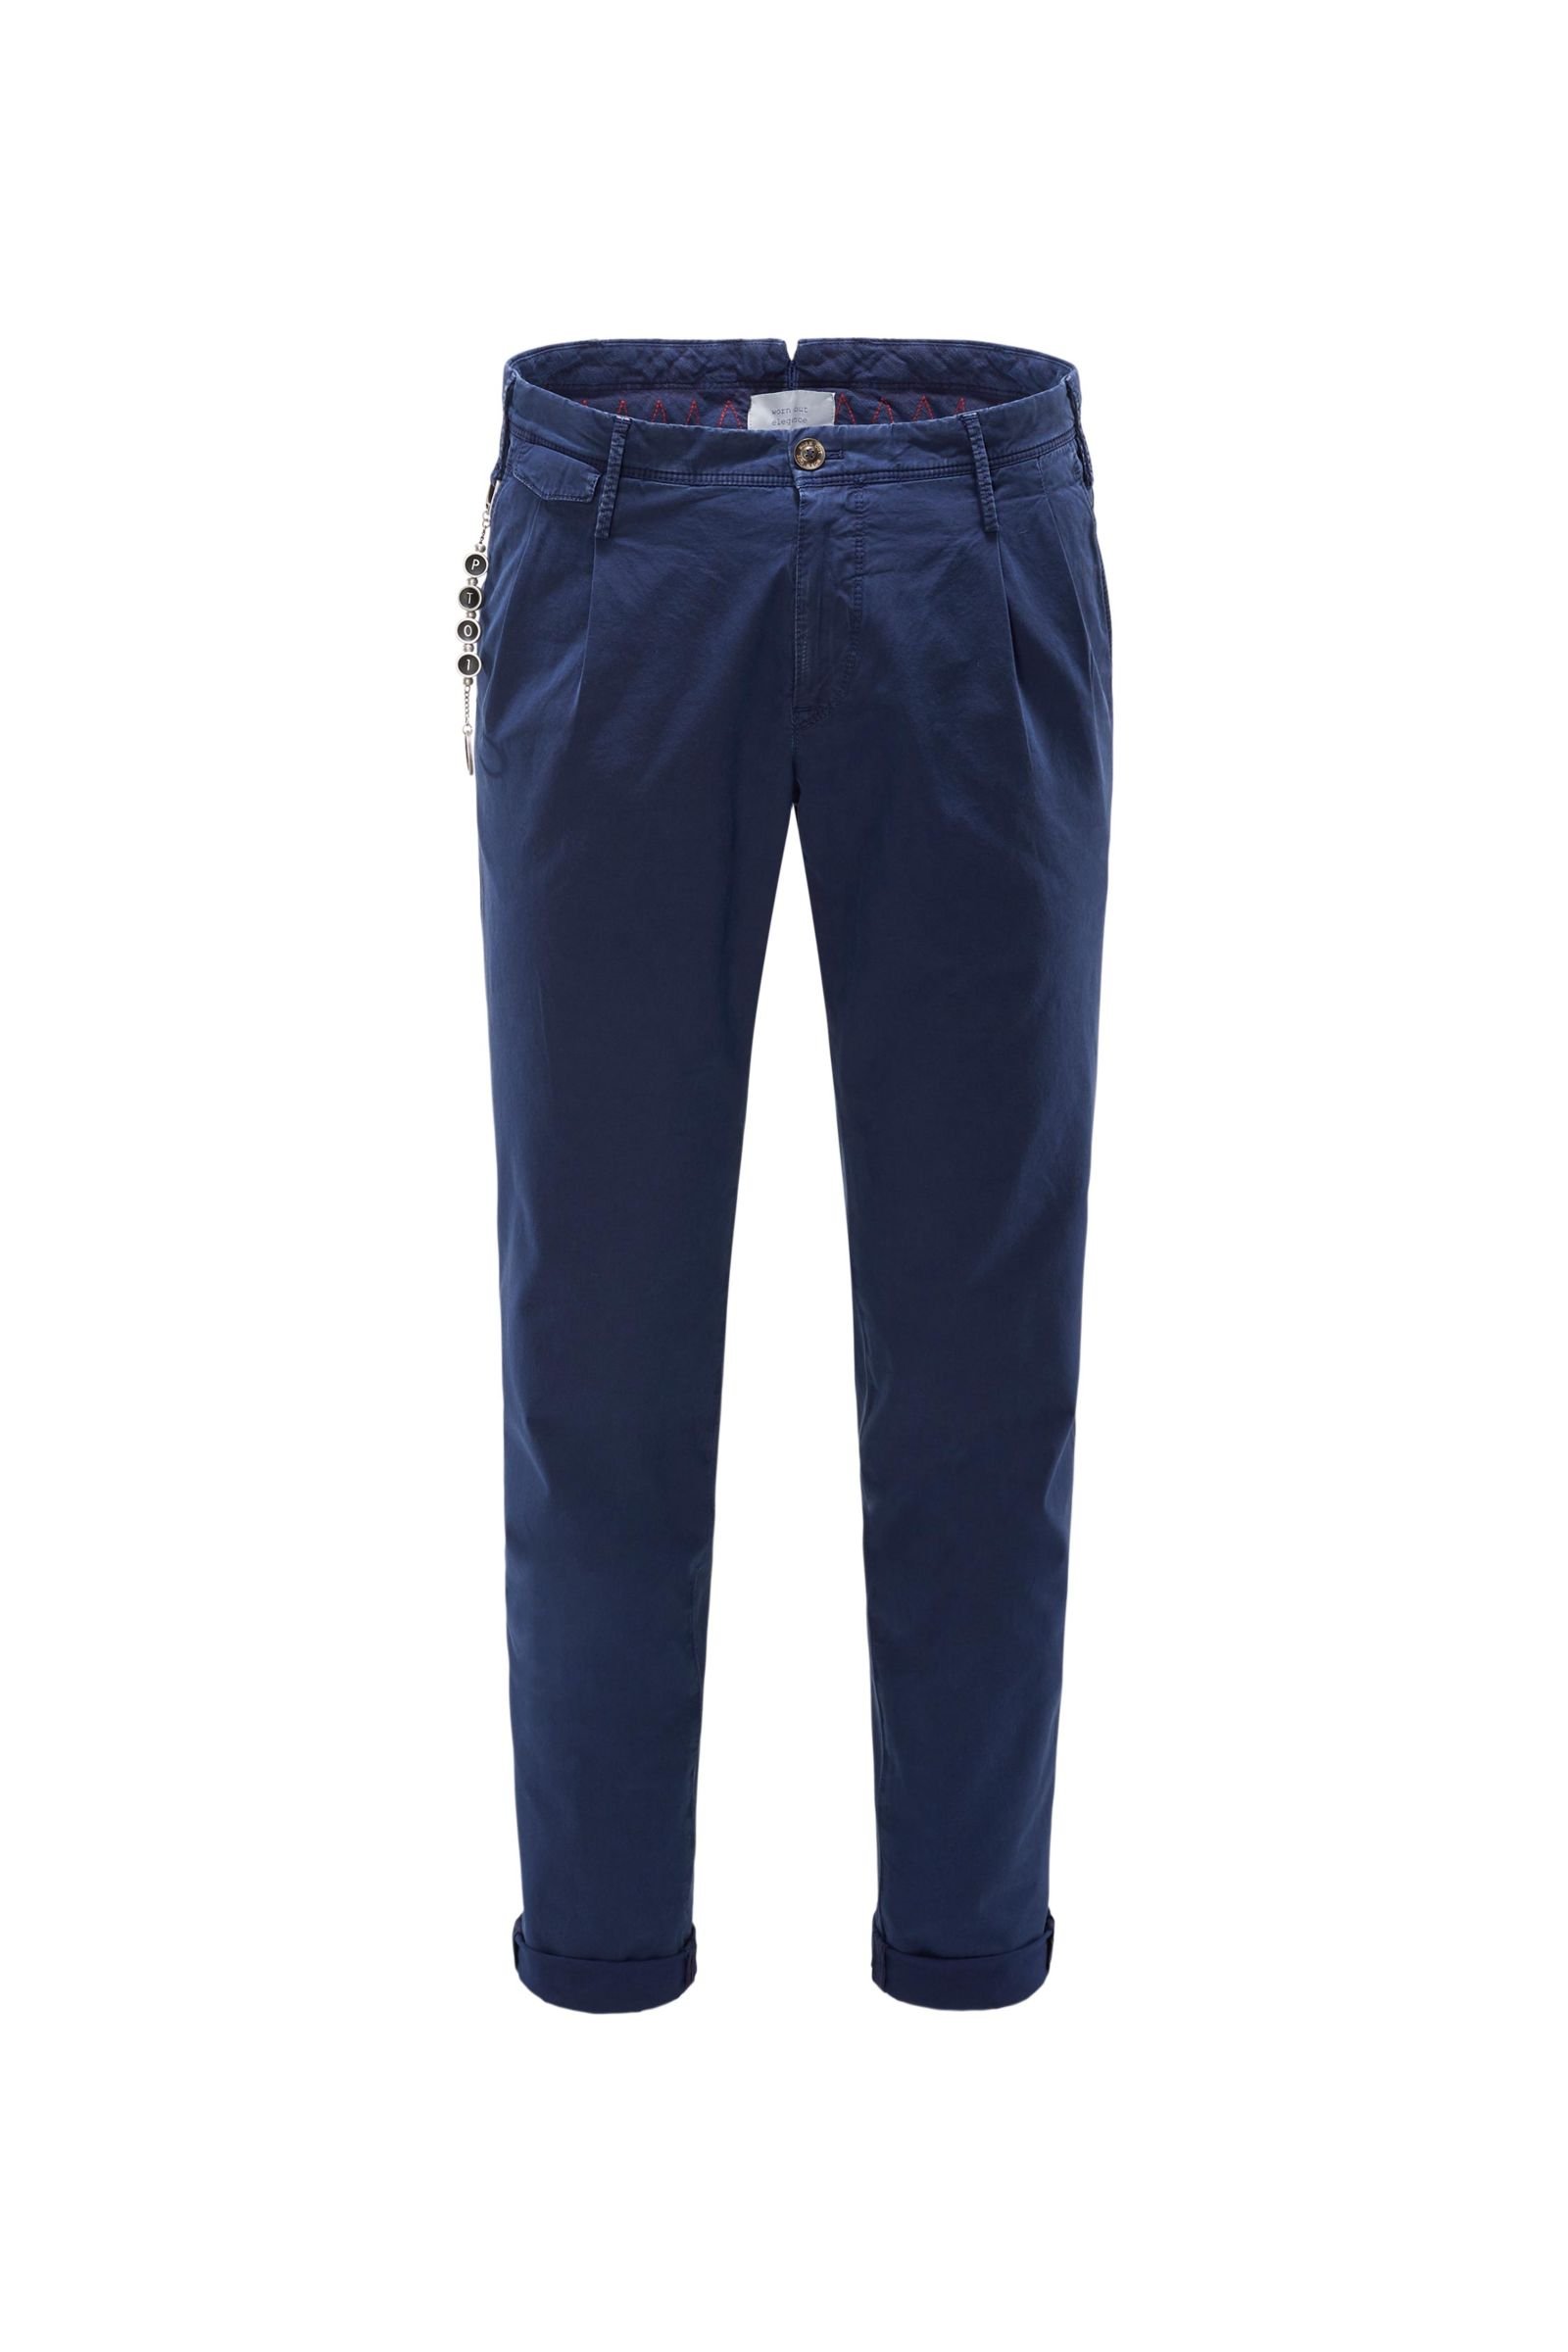 Cotton trousers 'Worn out Elegance' dark blue